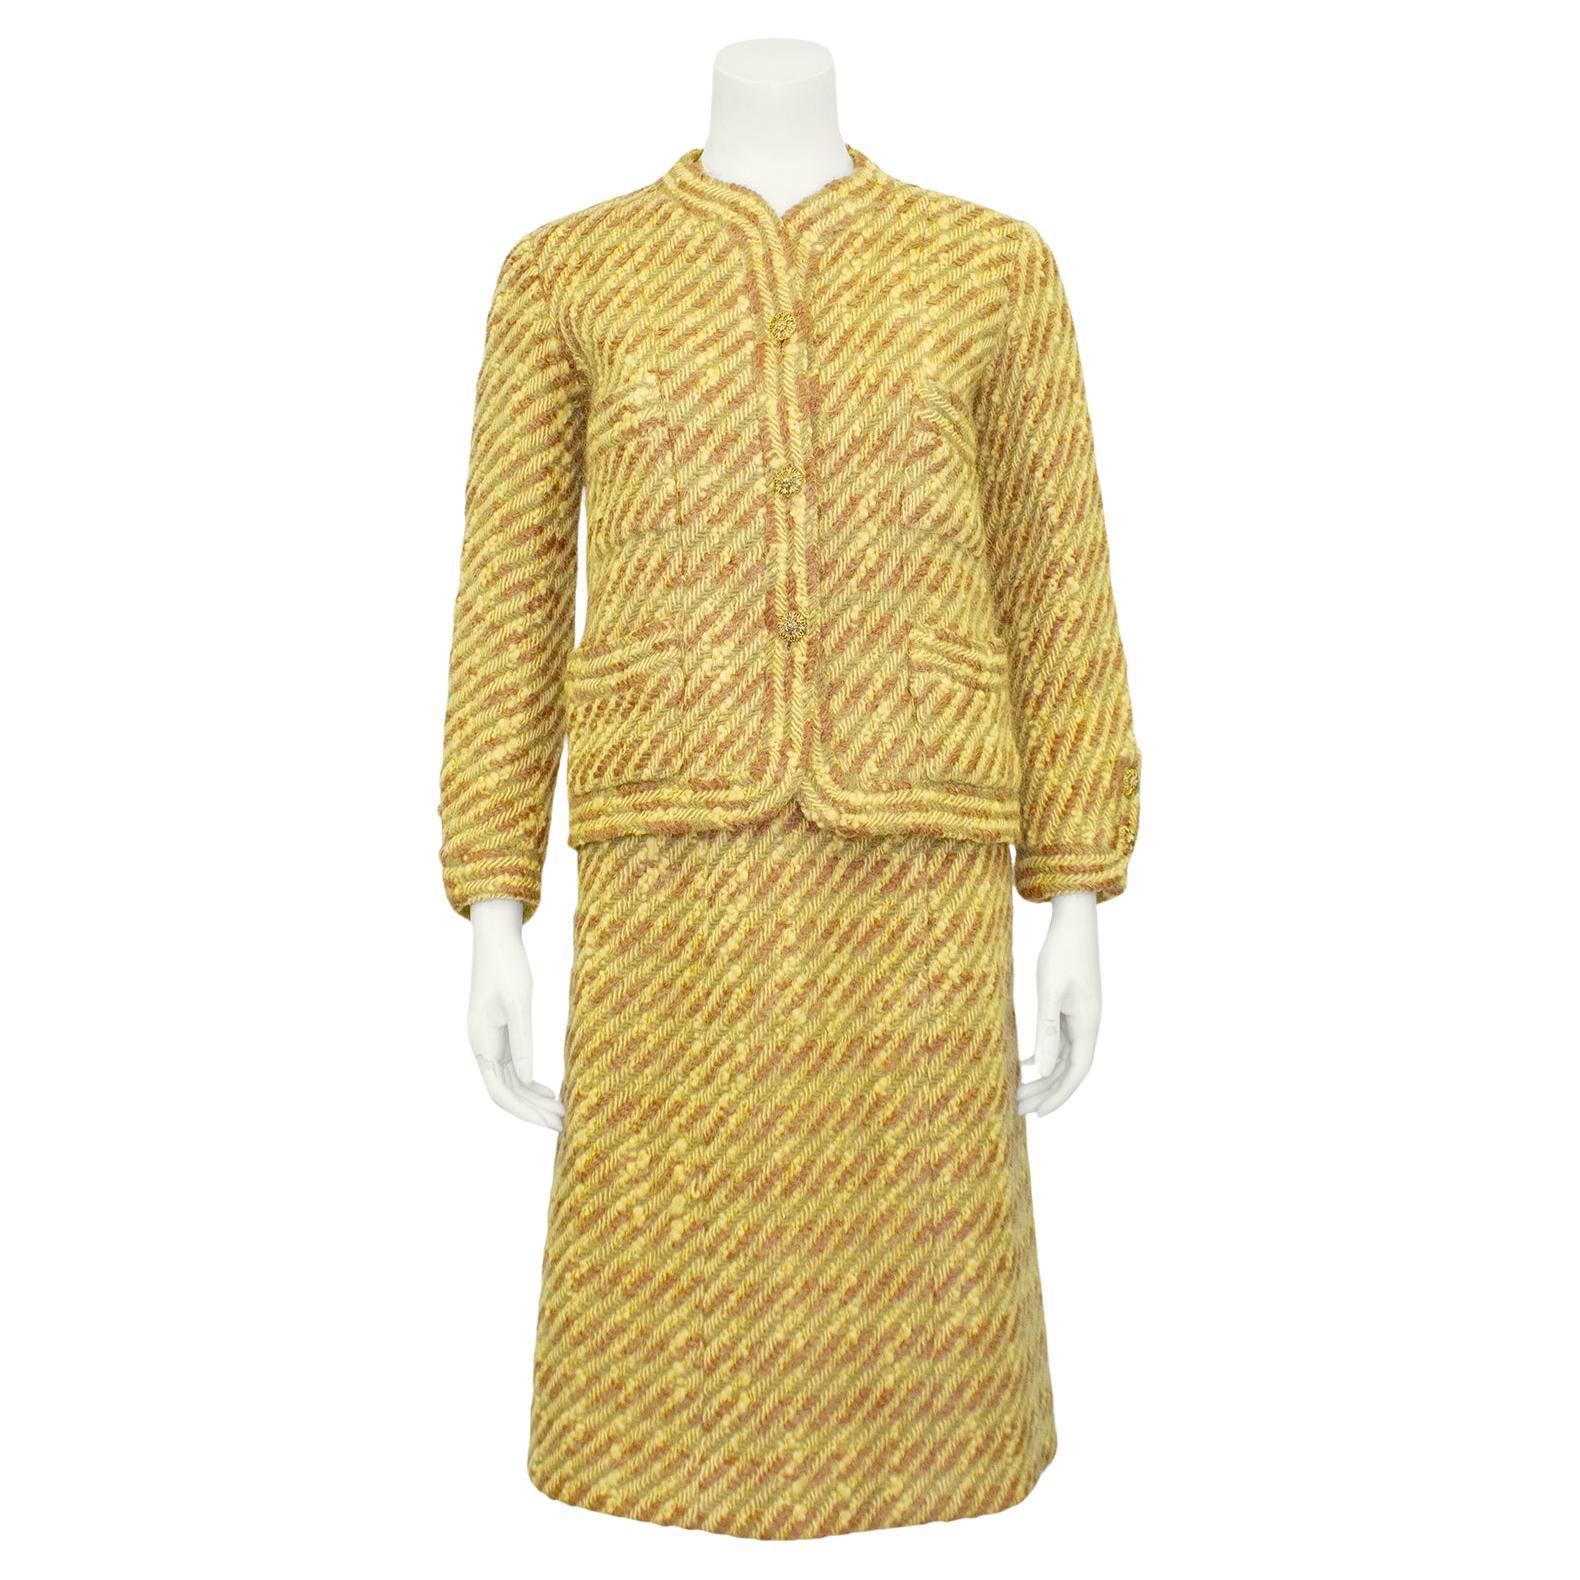 1960s Chanel Haute Couture Gold and Brown Jacket and Dress Ensemble For ...